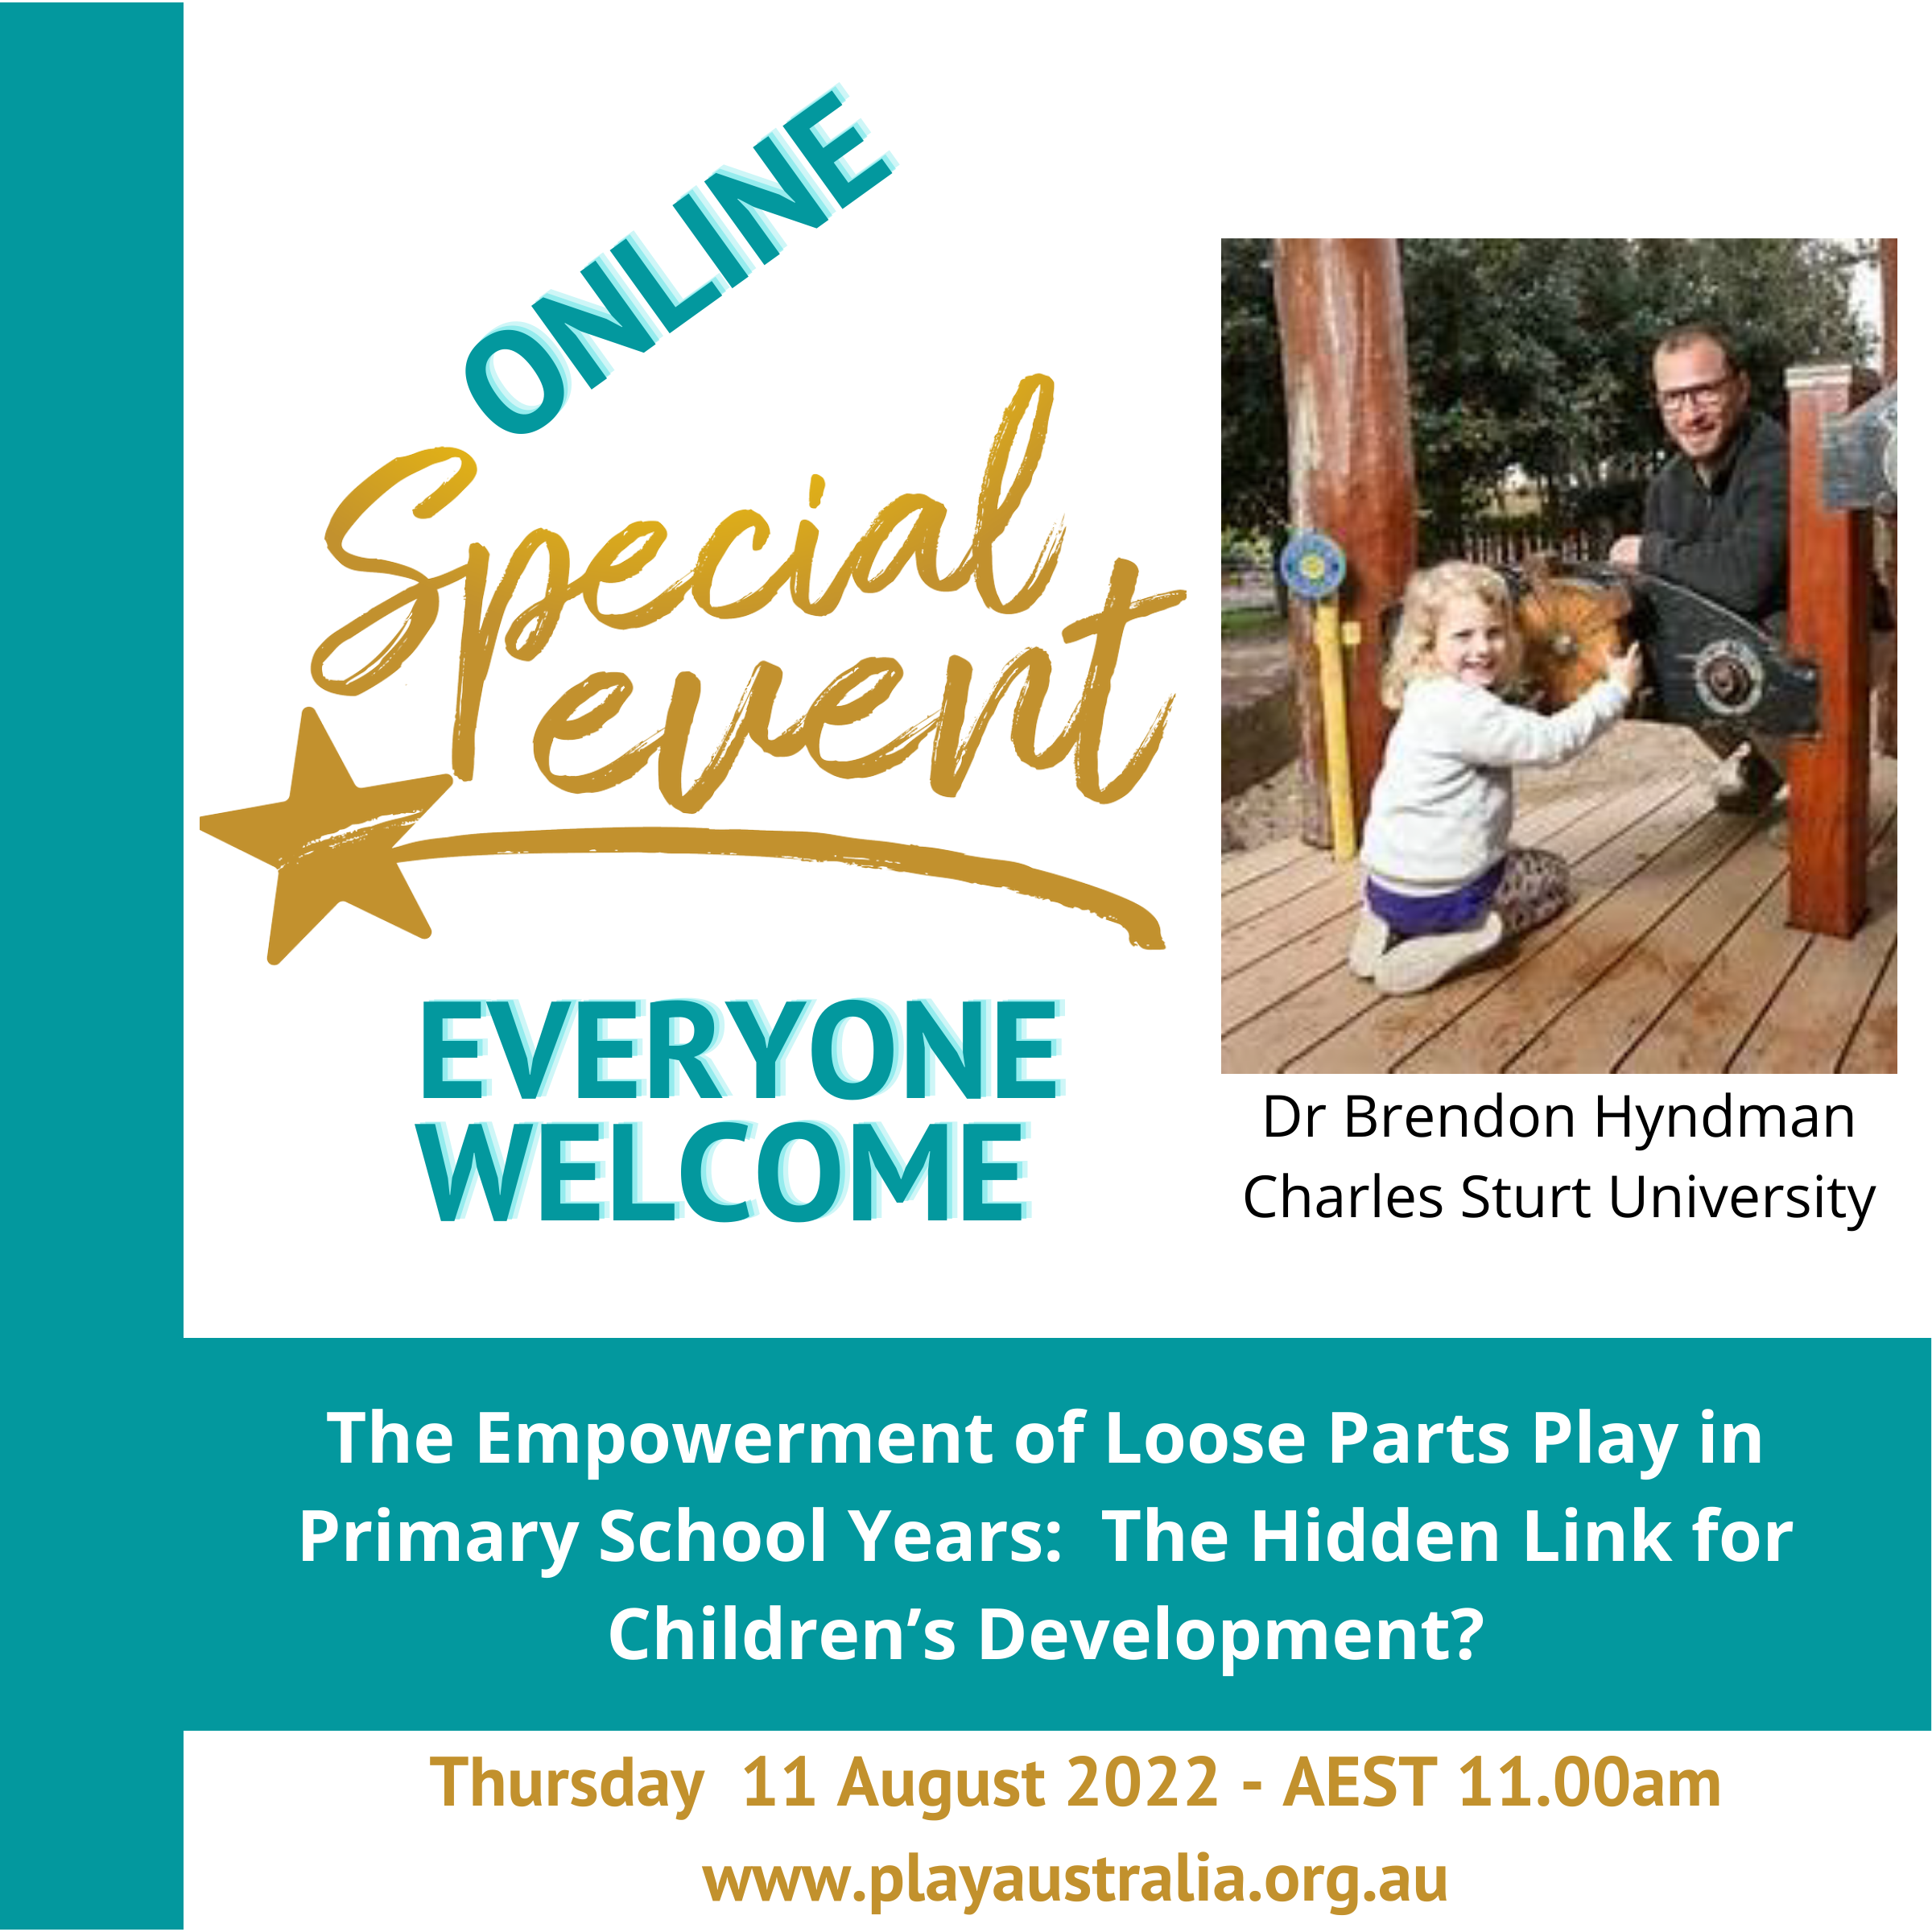 The empowerment of loose parts play, Play Australia Online Learning Series